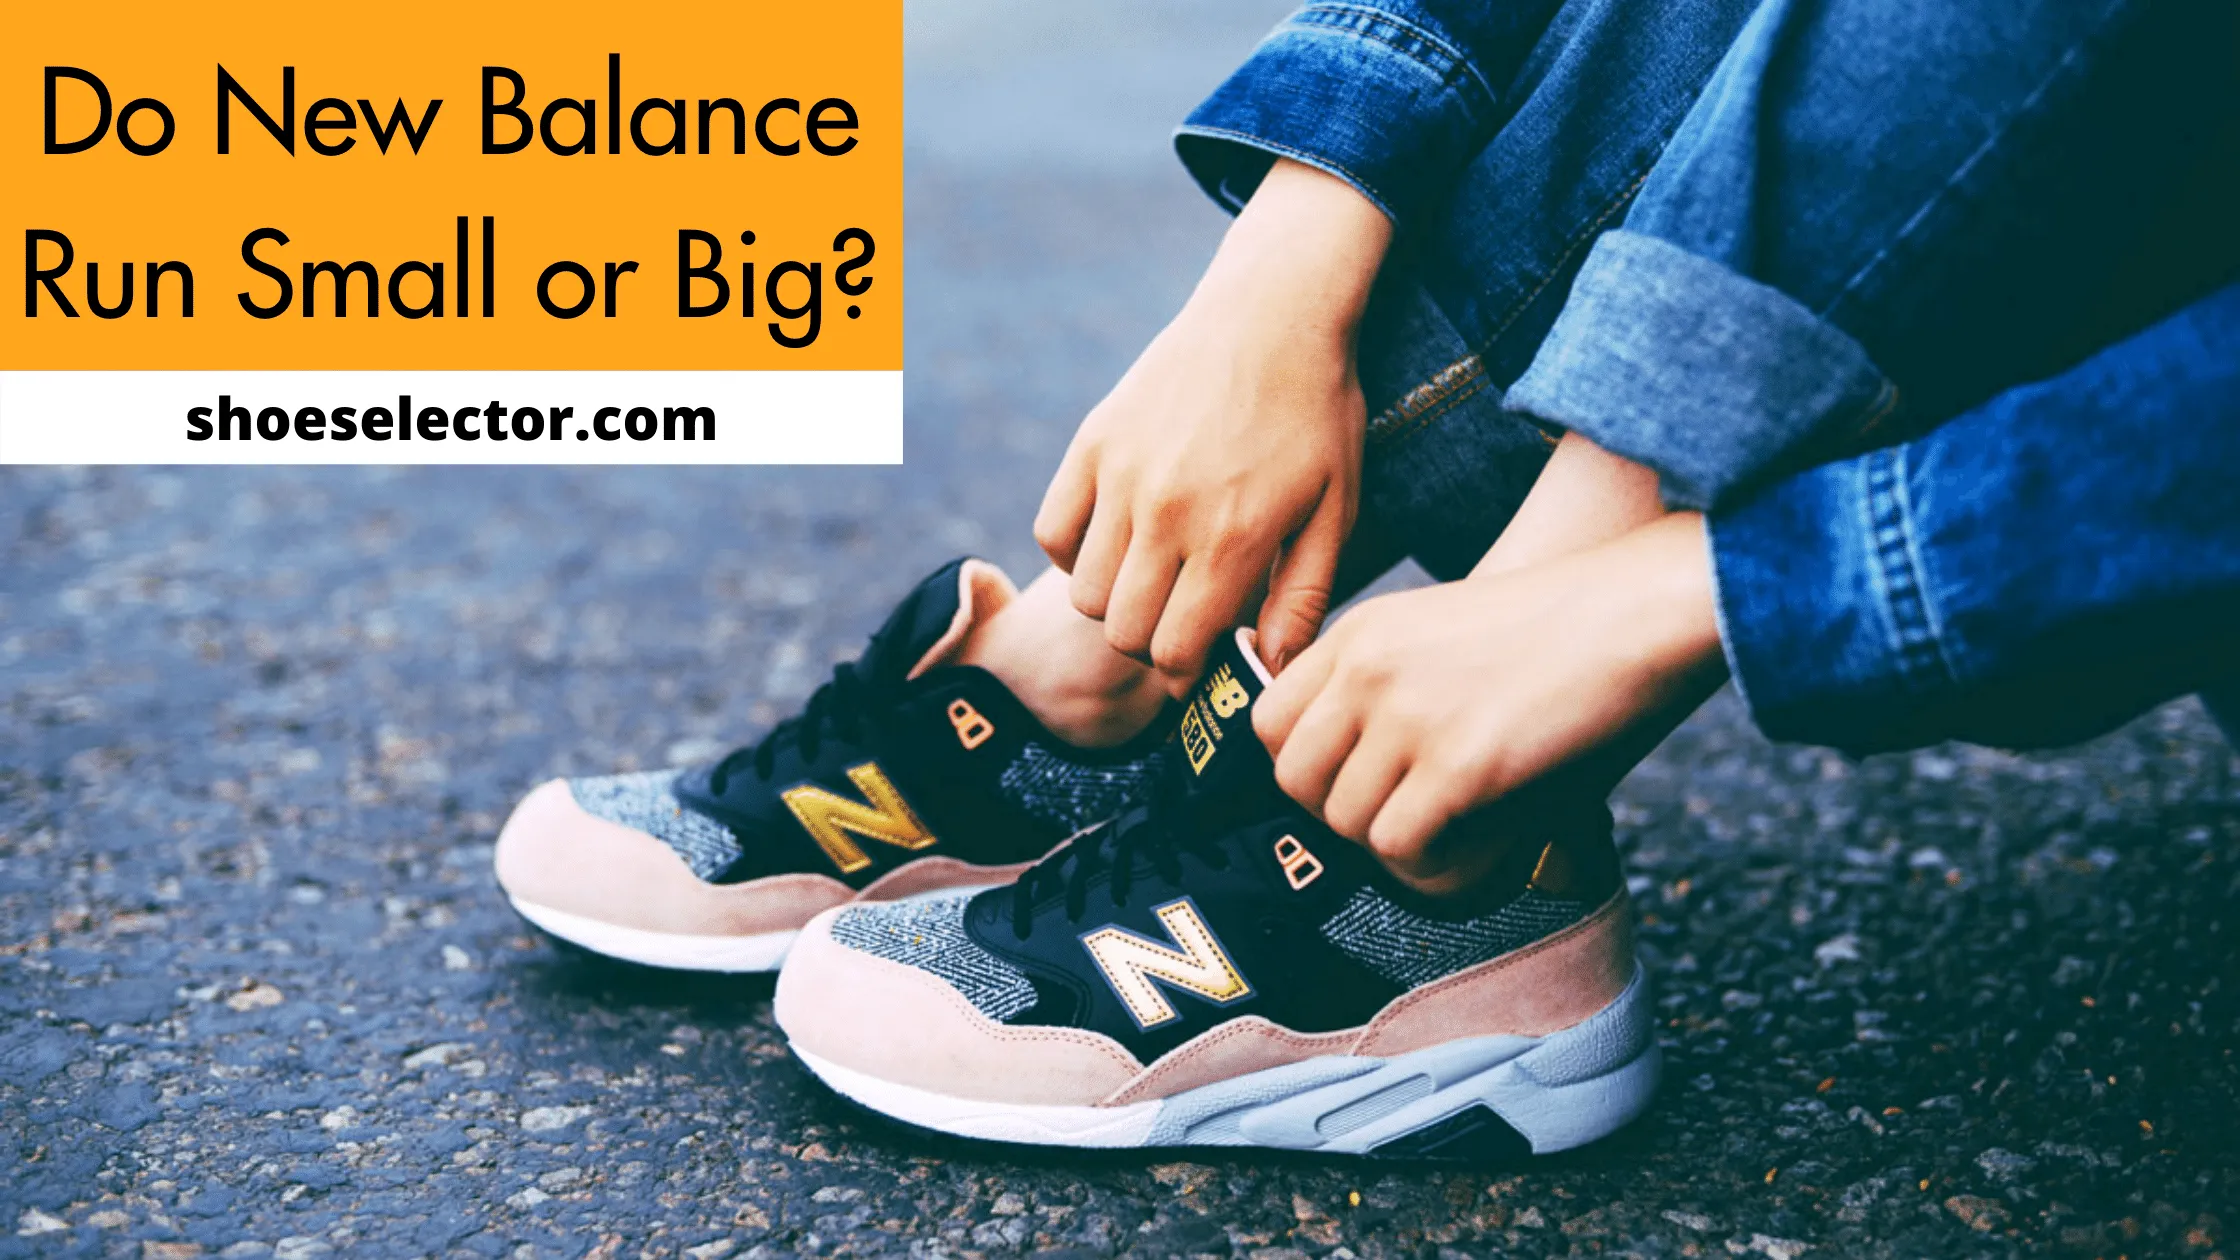 Do New Balance Run Small or Big? - Complete Guide